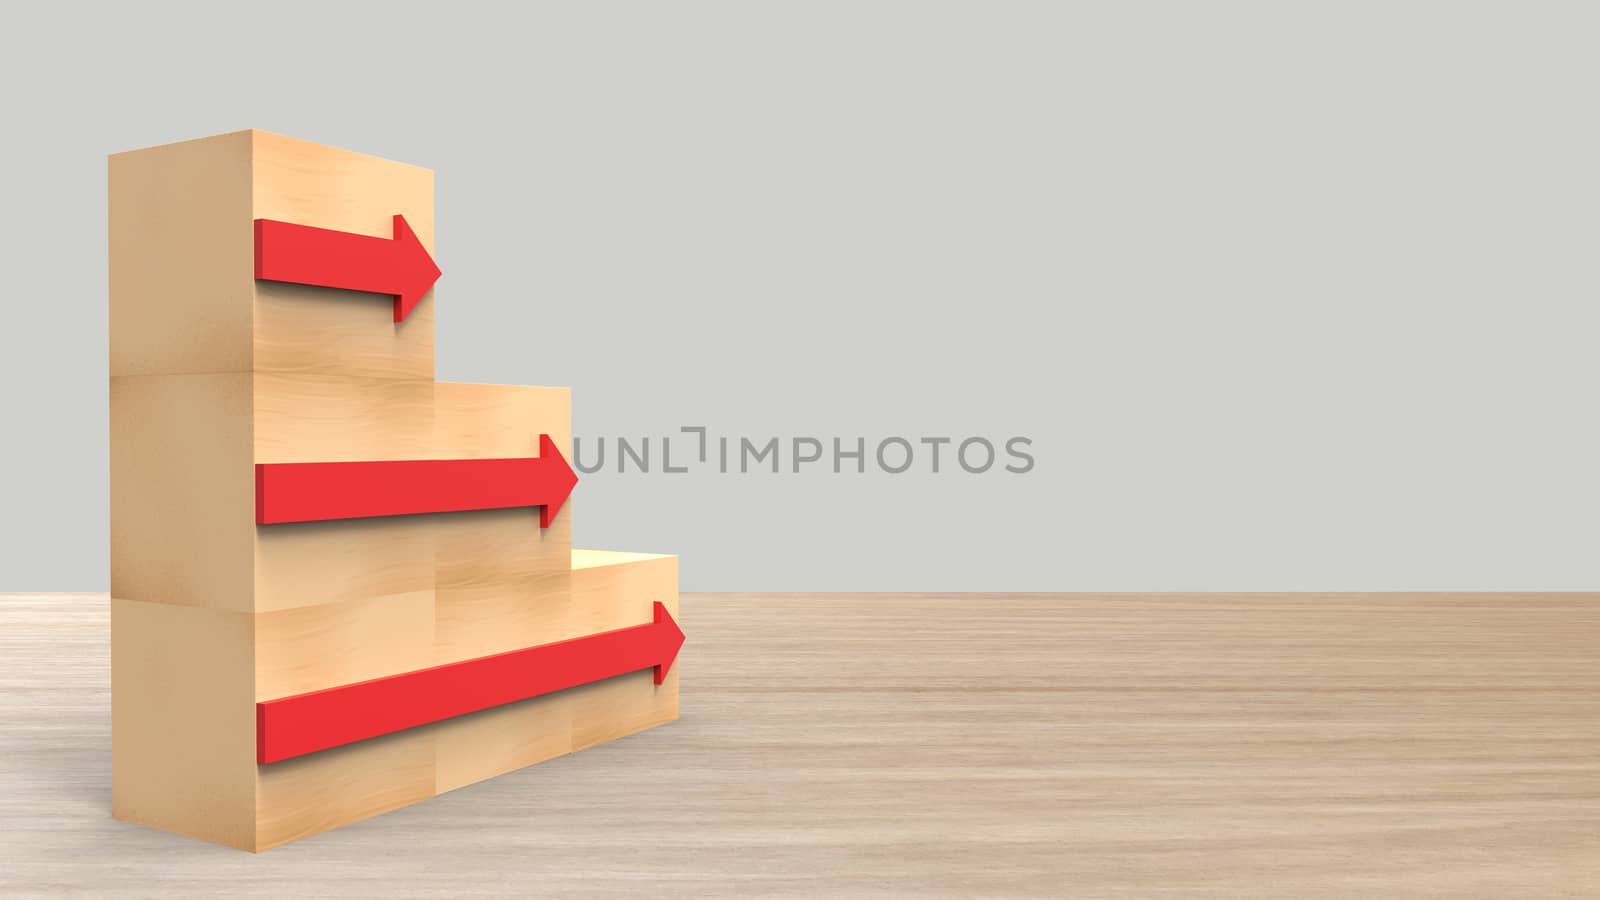 wood block stacking as left stair with red arrow right. Ladder career path concept for business growth success process. On wood wooden table with light gray background HD. Render 3d illustration